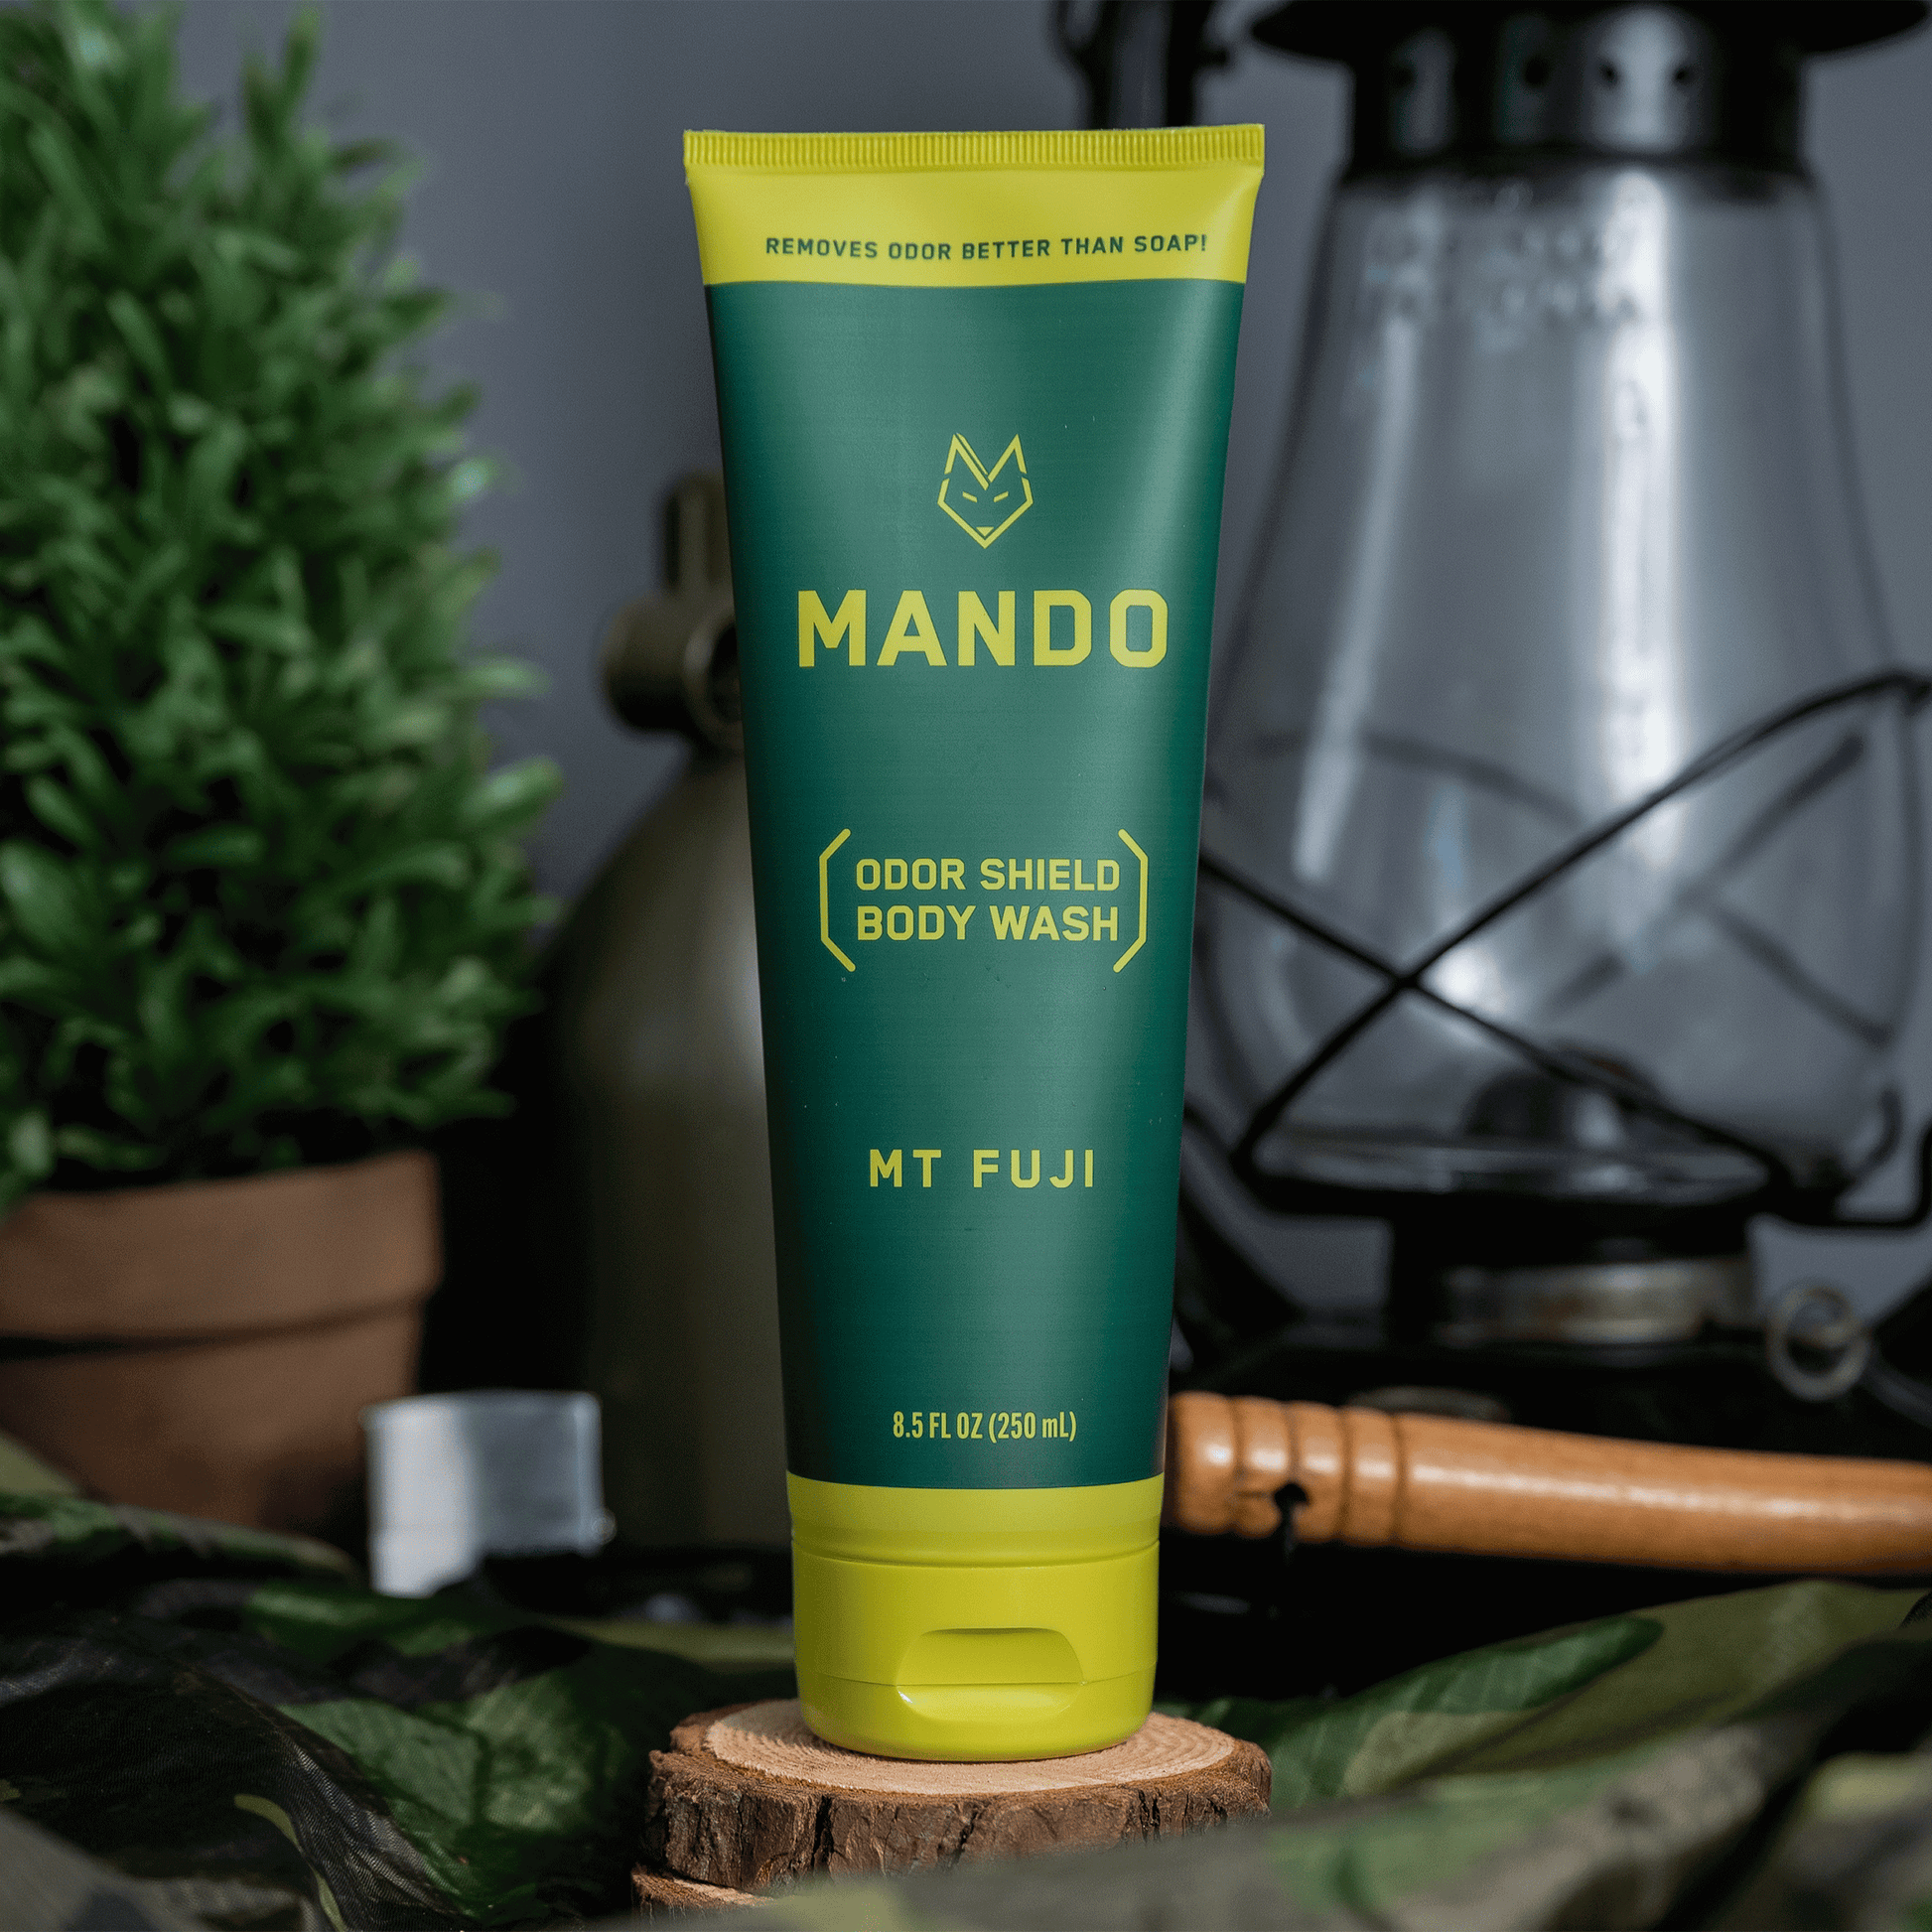 yellow green tube of Mando body wash in Mt Fuji scent placed on wood with a lantern in the background